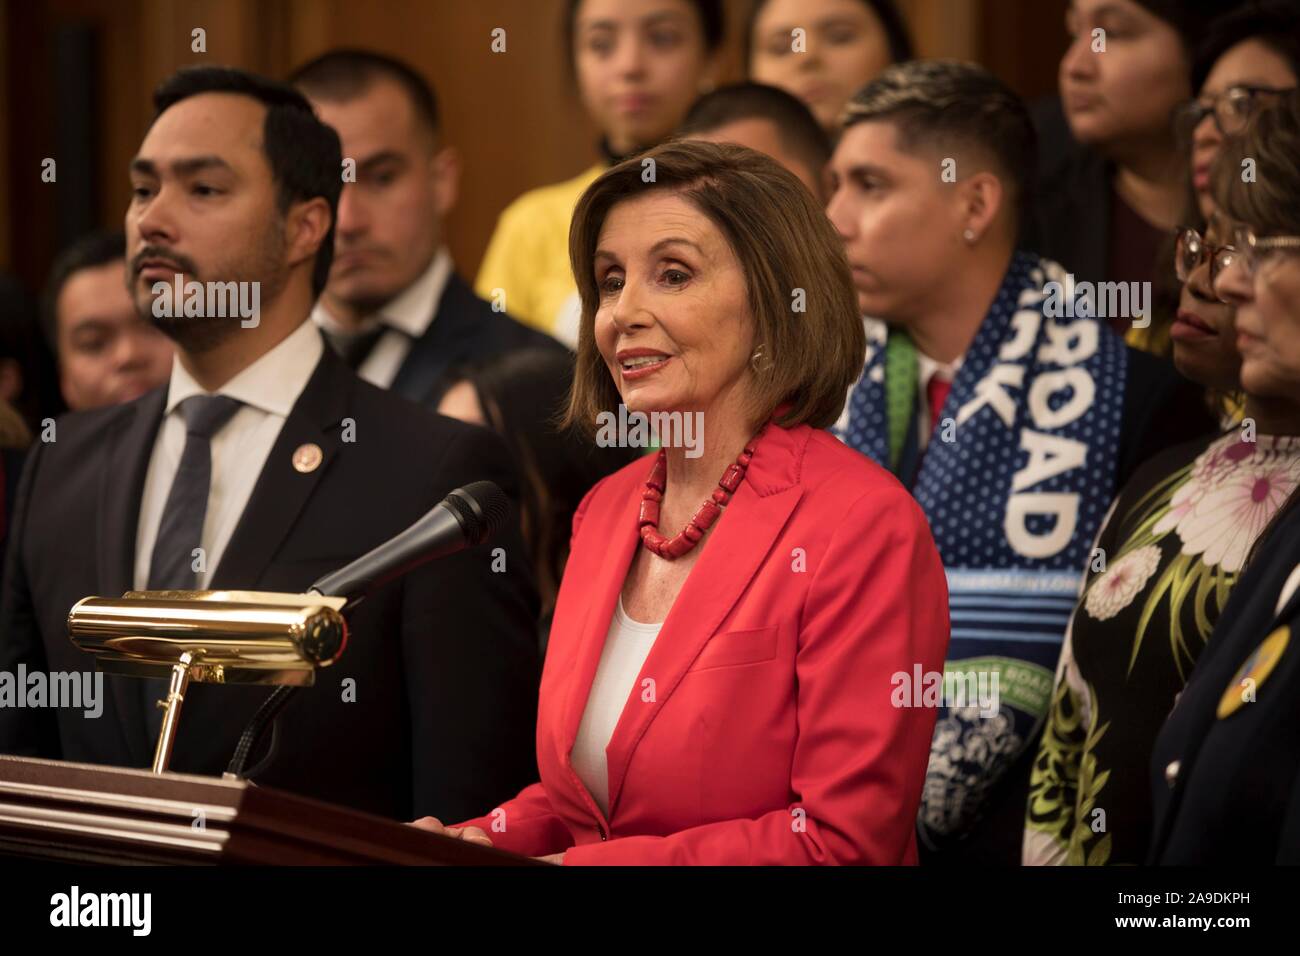 U.S. Speaker of the House Nancy Pelosi of California, joined by fellow democrats, calls on the Trump Administration to reverse their termination of DACA during a press conference on Capitol Hill November 12, 2019 in Washington, DC. Members of the Senate and House joined plaintiffs in the DACA case demanded the Republican-controlled Senate to pass the Dream and Promise Act to allow children of undocumented migrants to stay in the United States. Stock Photo